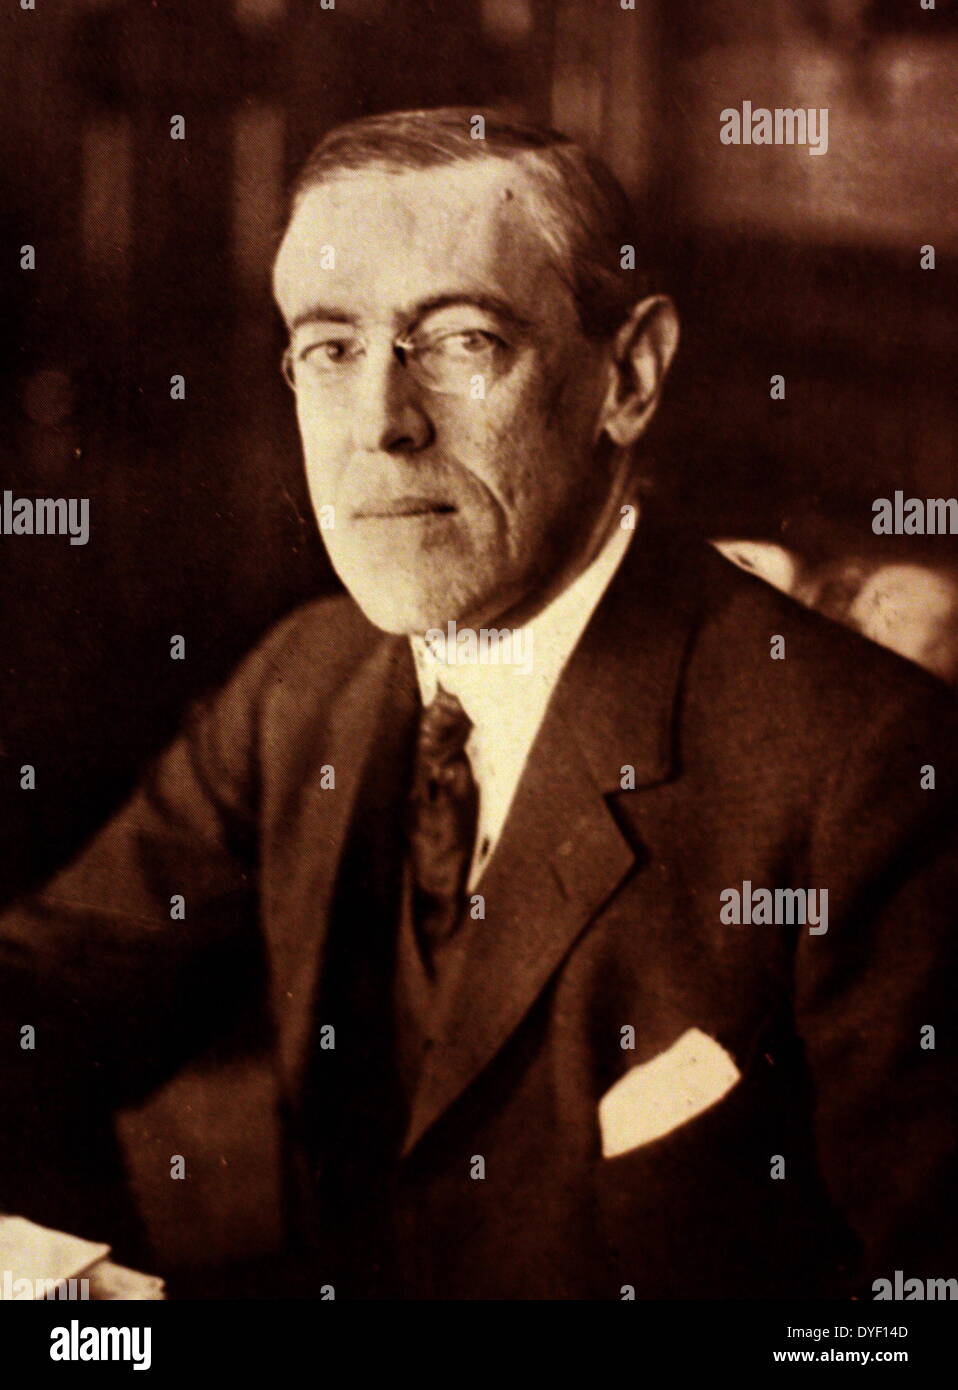 Photograph portrait of President Thomas Woodrow Wilson.  The 28th President of the United States, in office from 1913 to 1921, Lived between 1856 and 1924. Considered to have been able to push a legislative agenda that few Presidents have equaled. Stock Photo